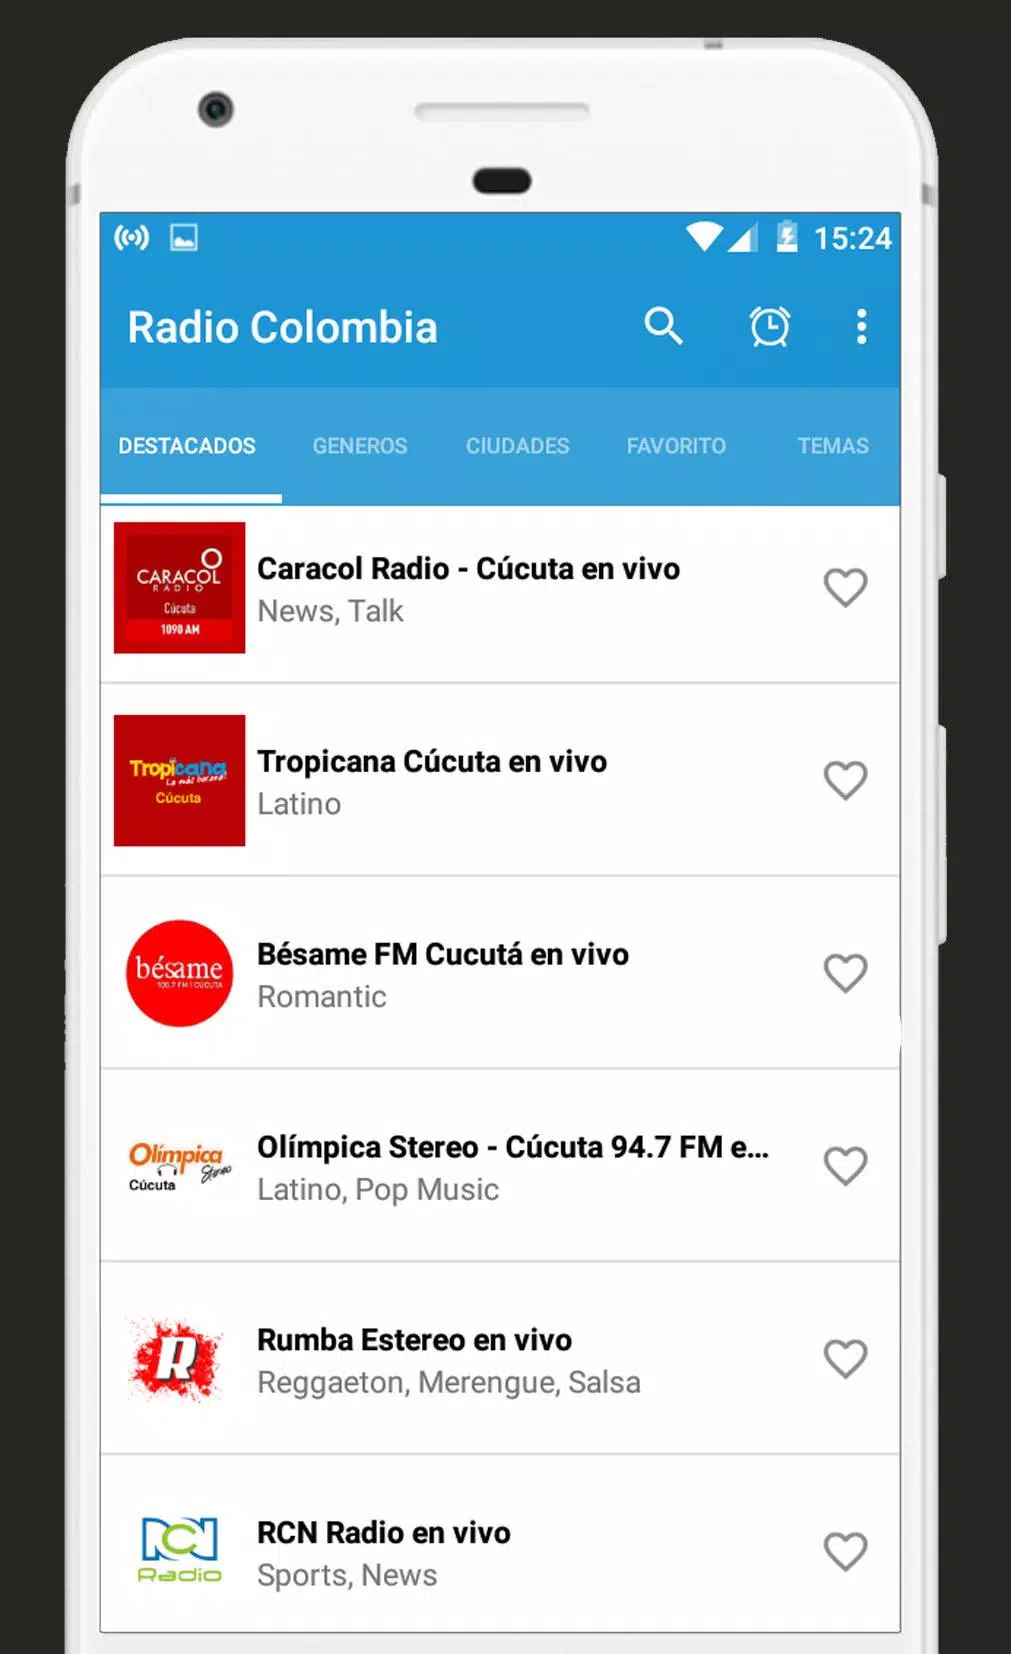 Radio Colombiana Gratis for Android - APK Download